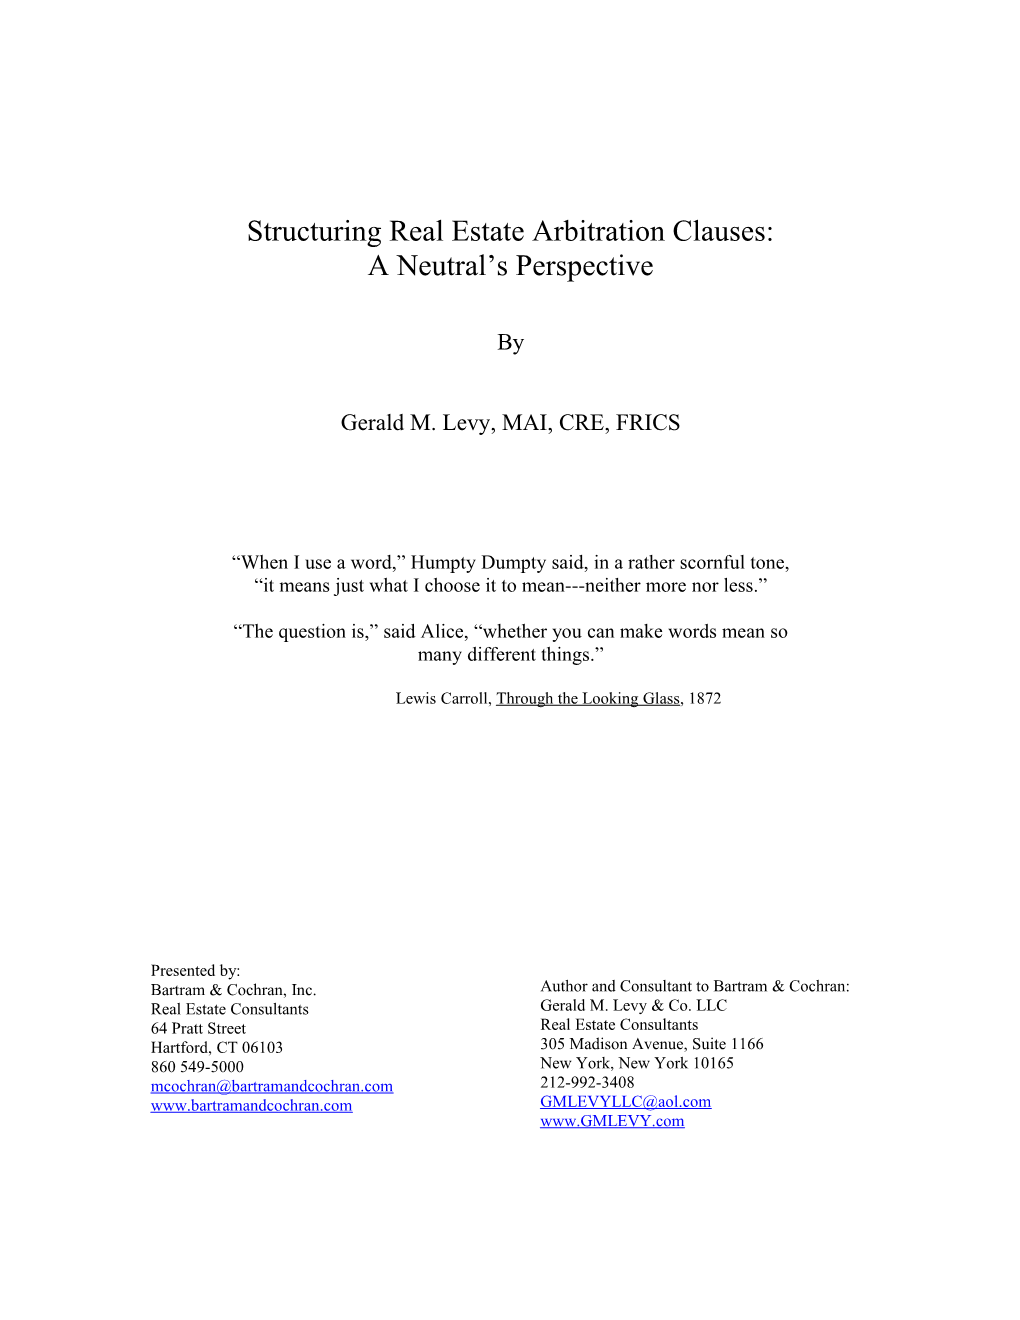 Structuring Real Estate Arbitration Clauses